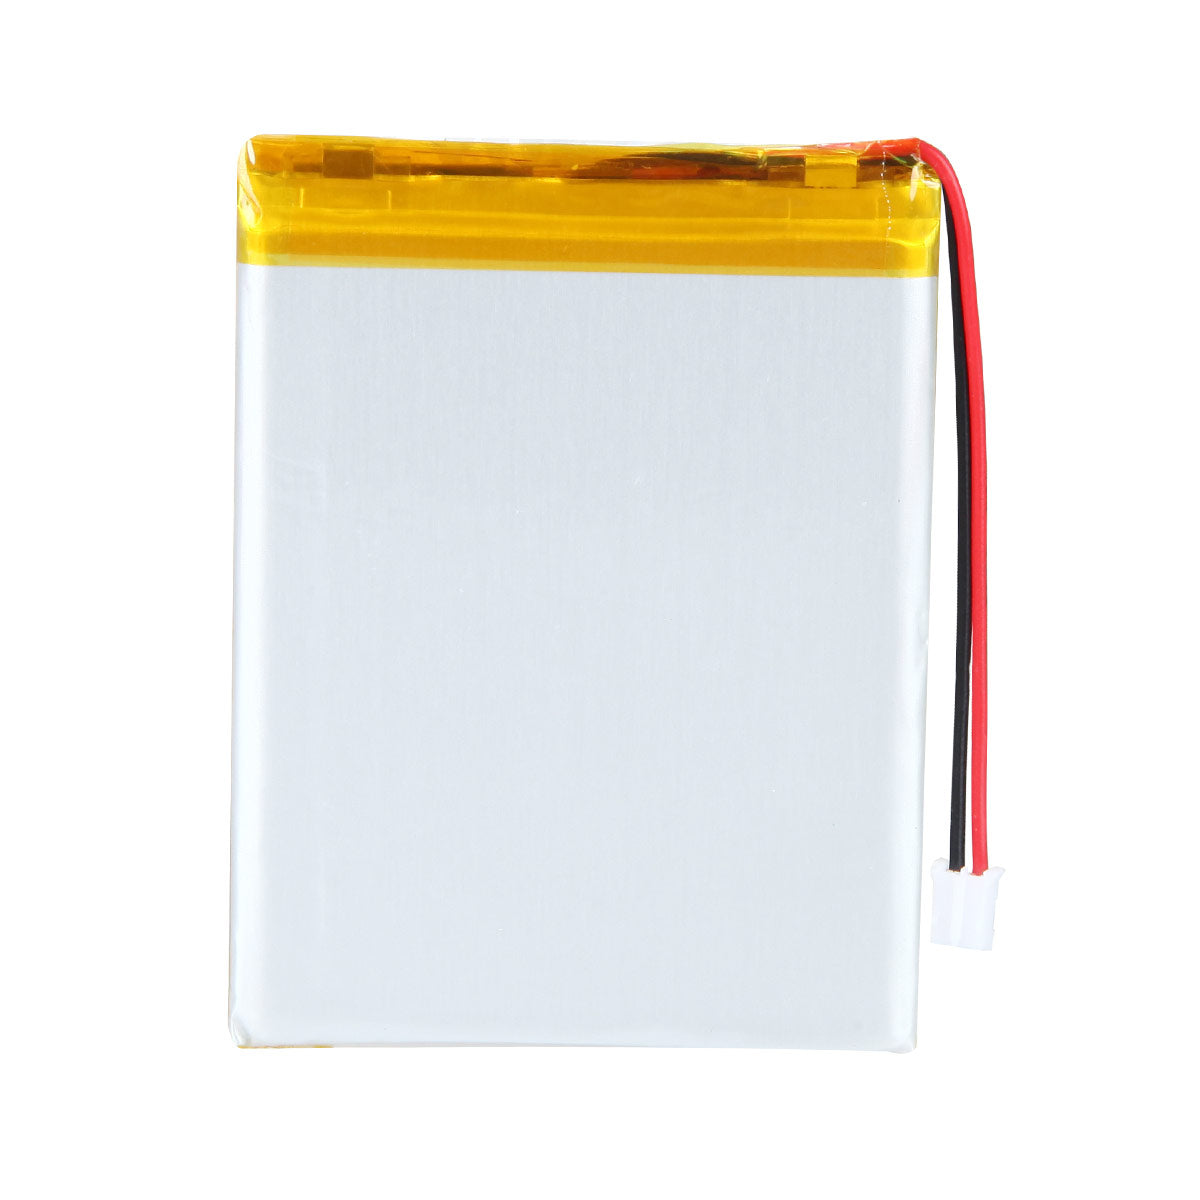 3.7V 2500mAh 485573 Rechargeable Lithium Polymer Battery